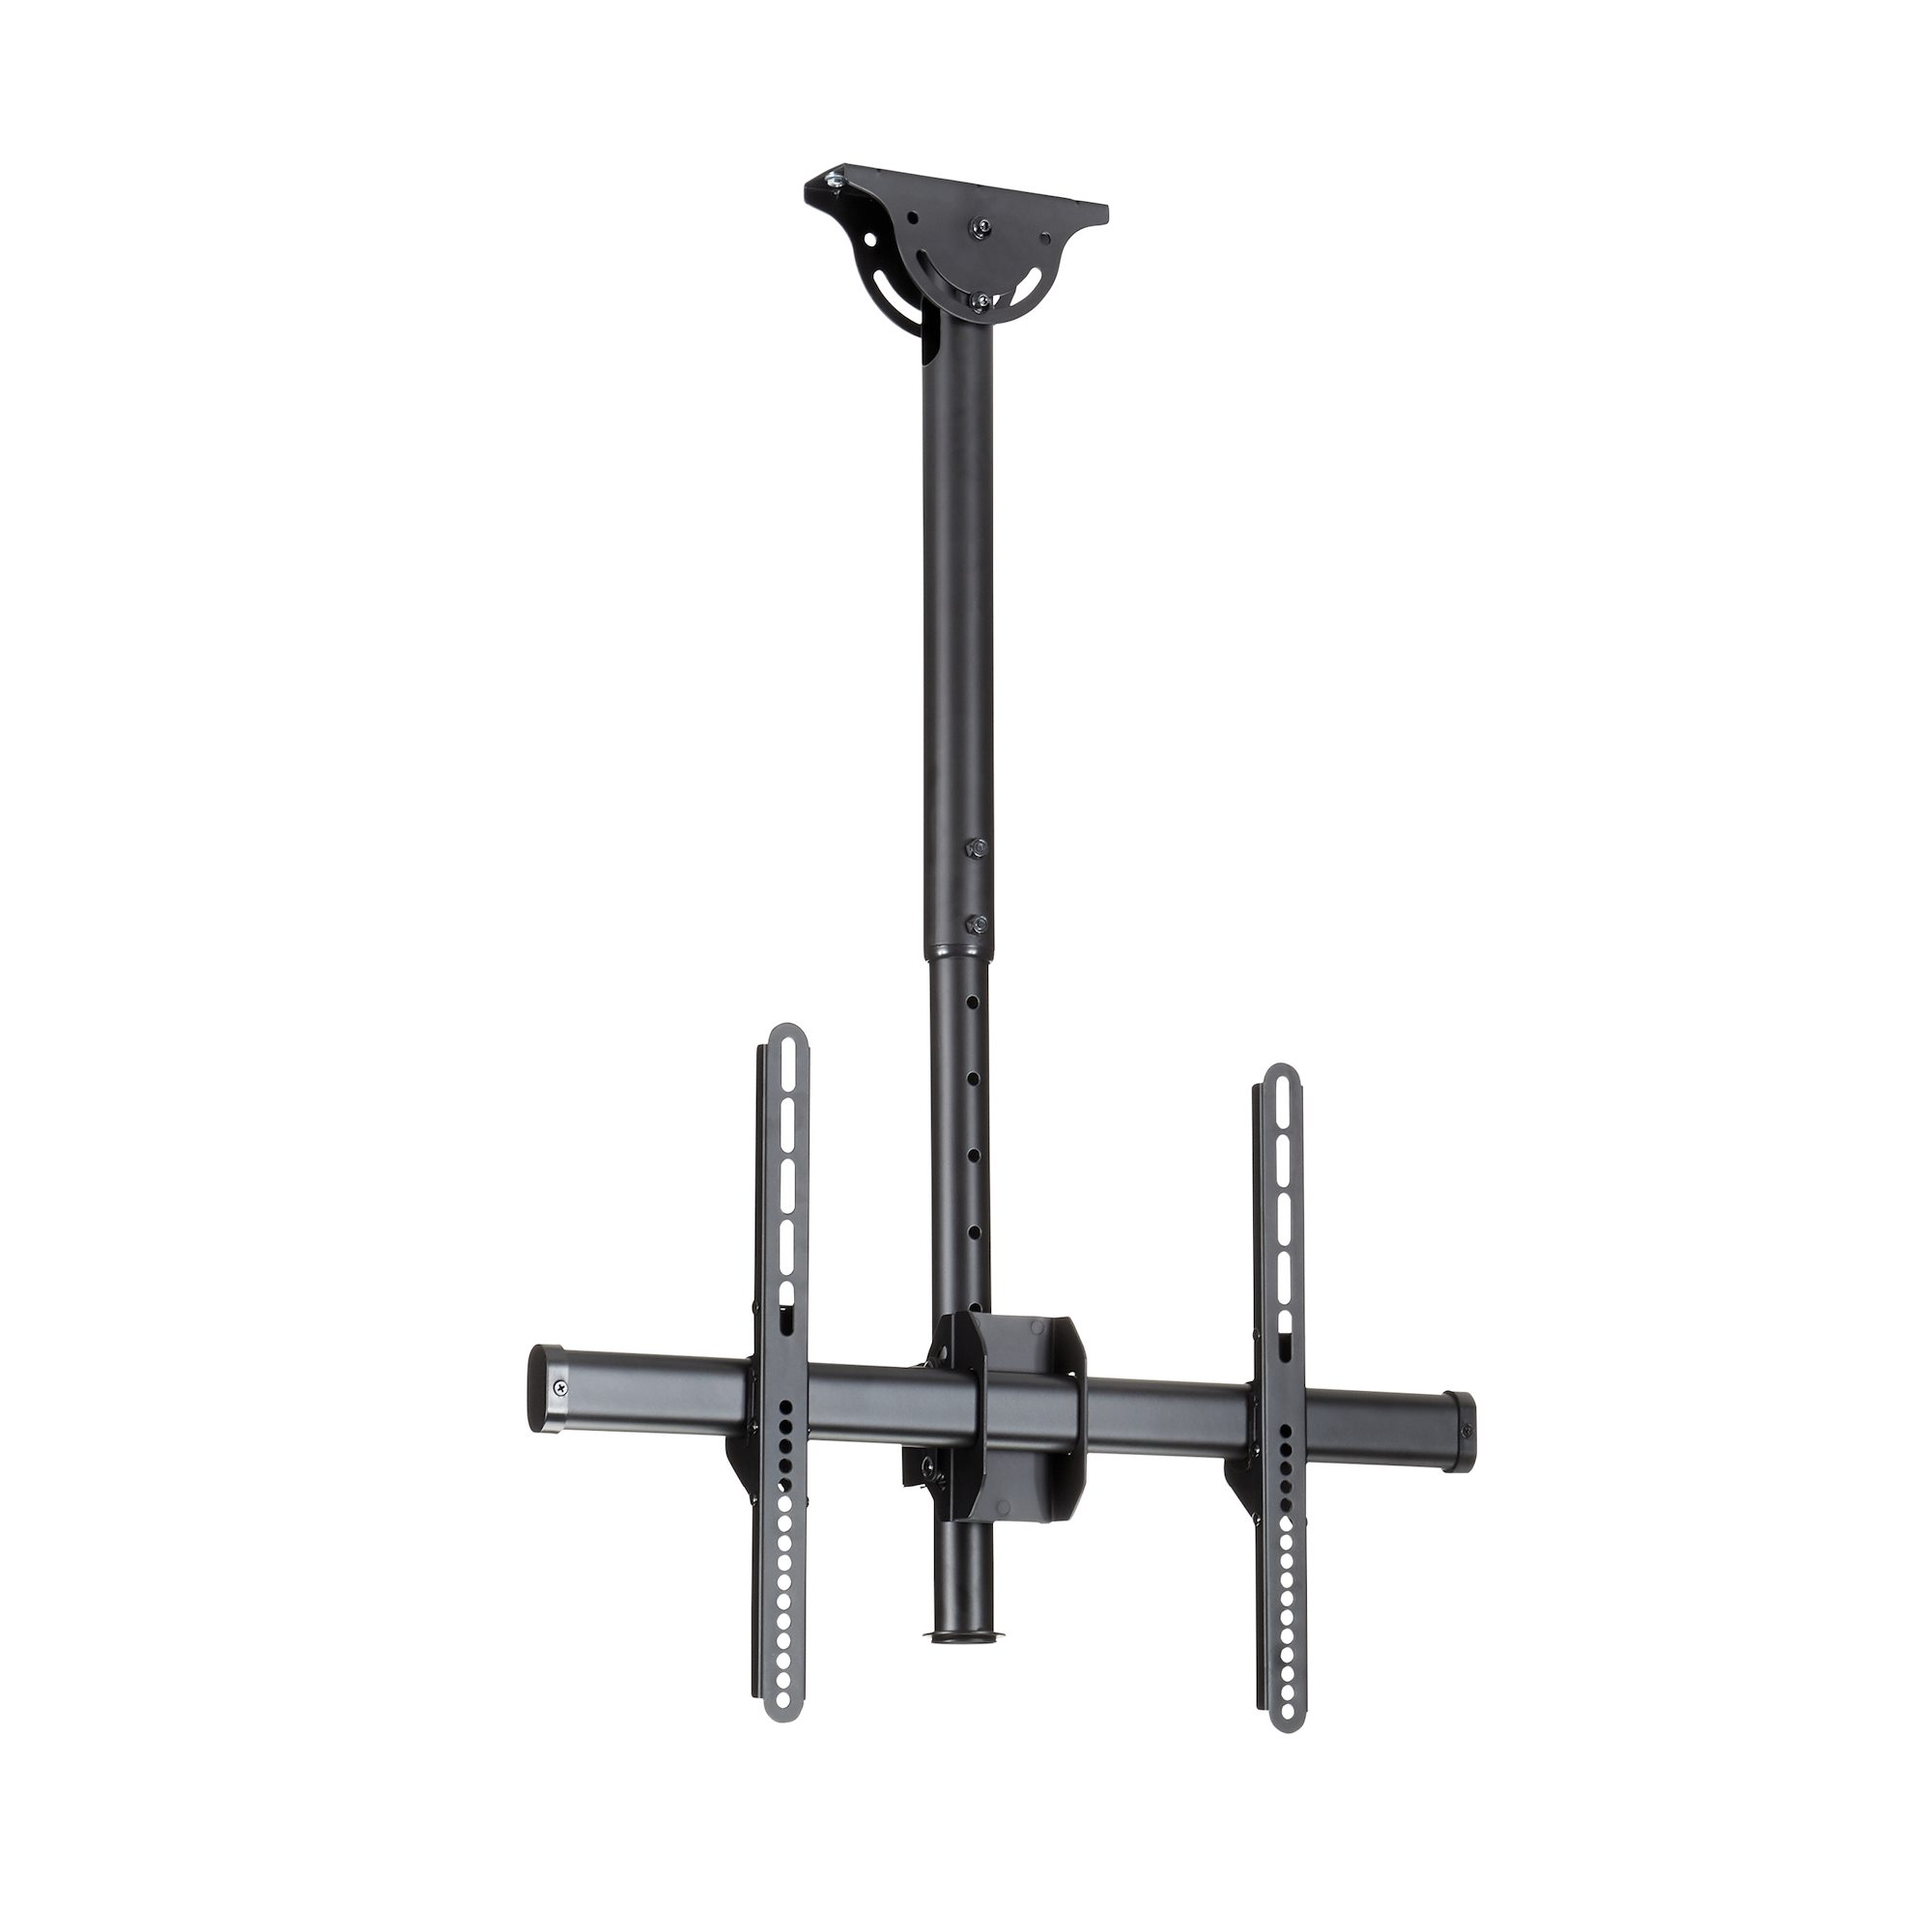 Ceiling Mount For Tv 1 8 To 3 Pole